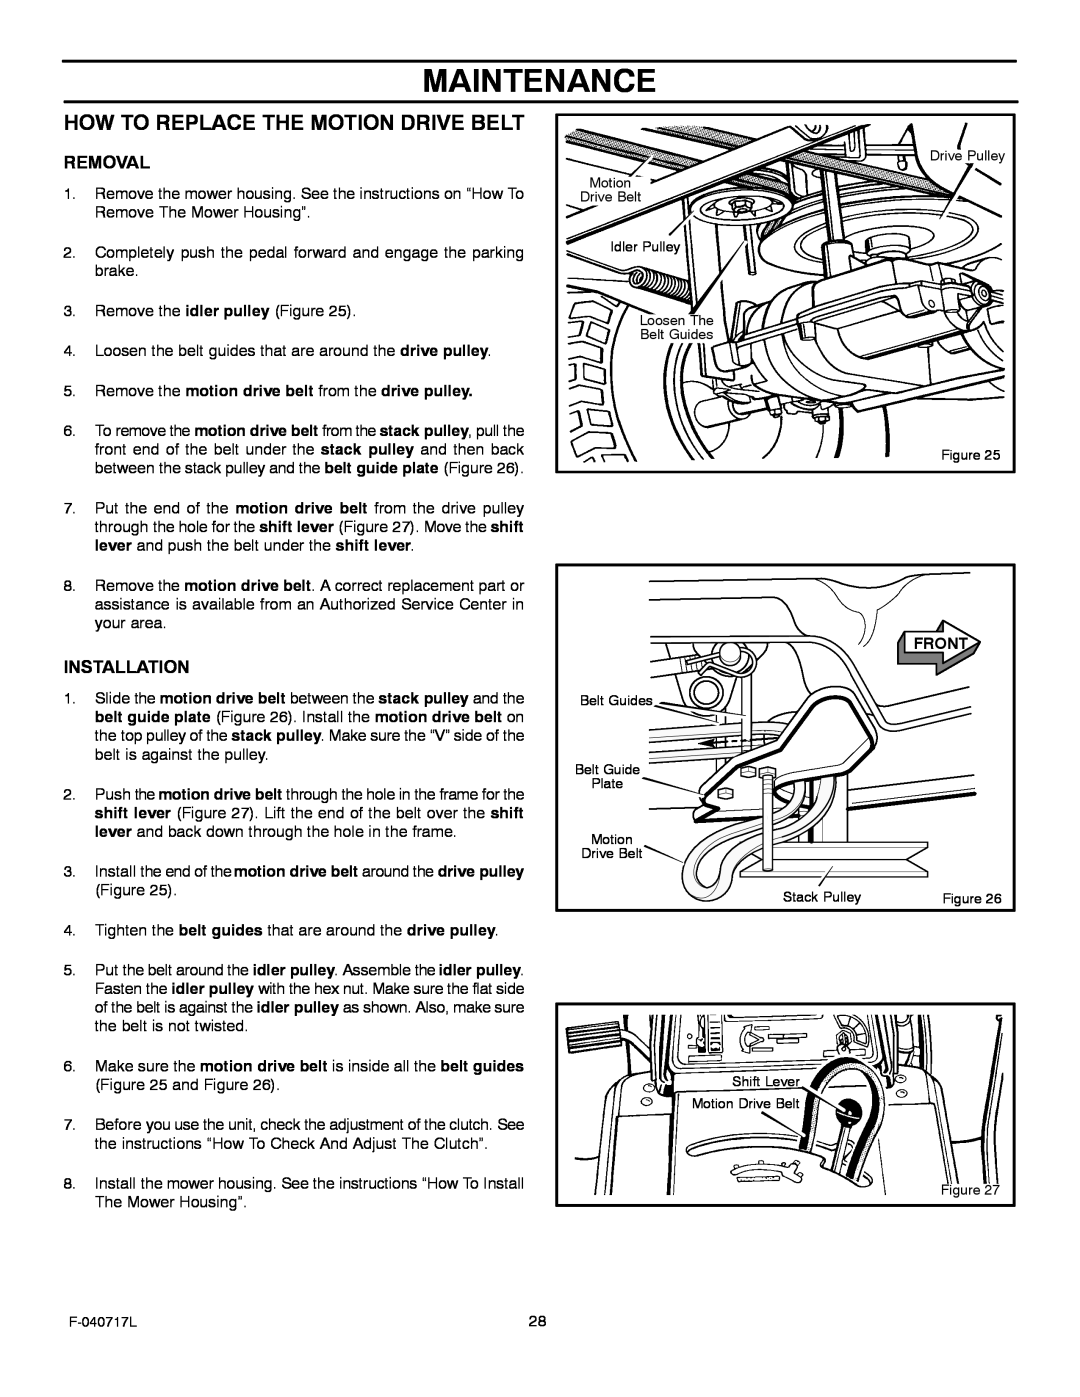 Murray 387002x92A manual Maintenance, How To Replace The Motion Drive Belt, Removal, Installation 